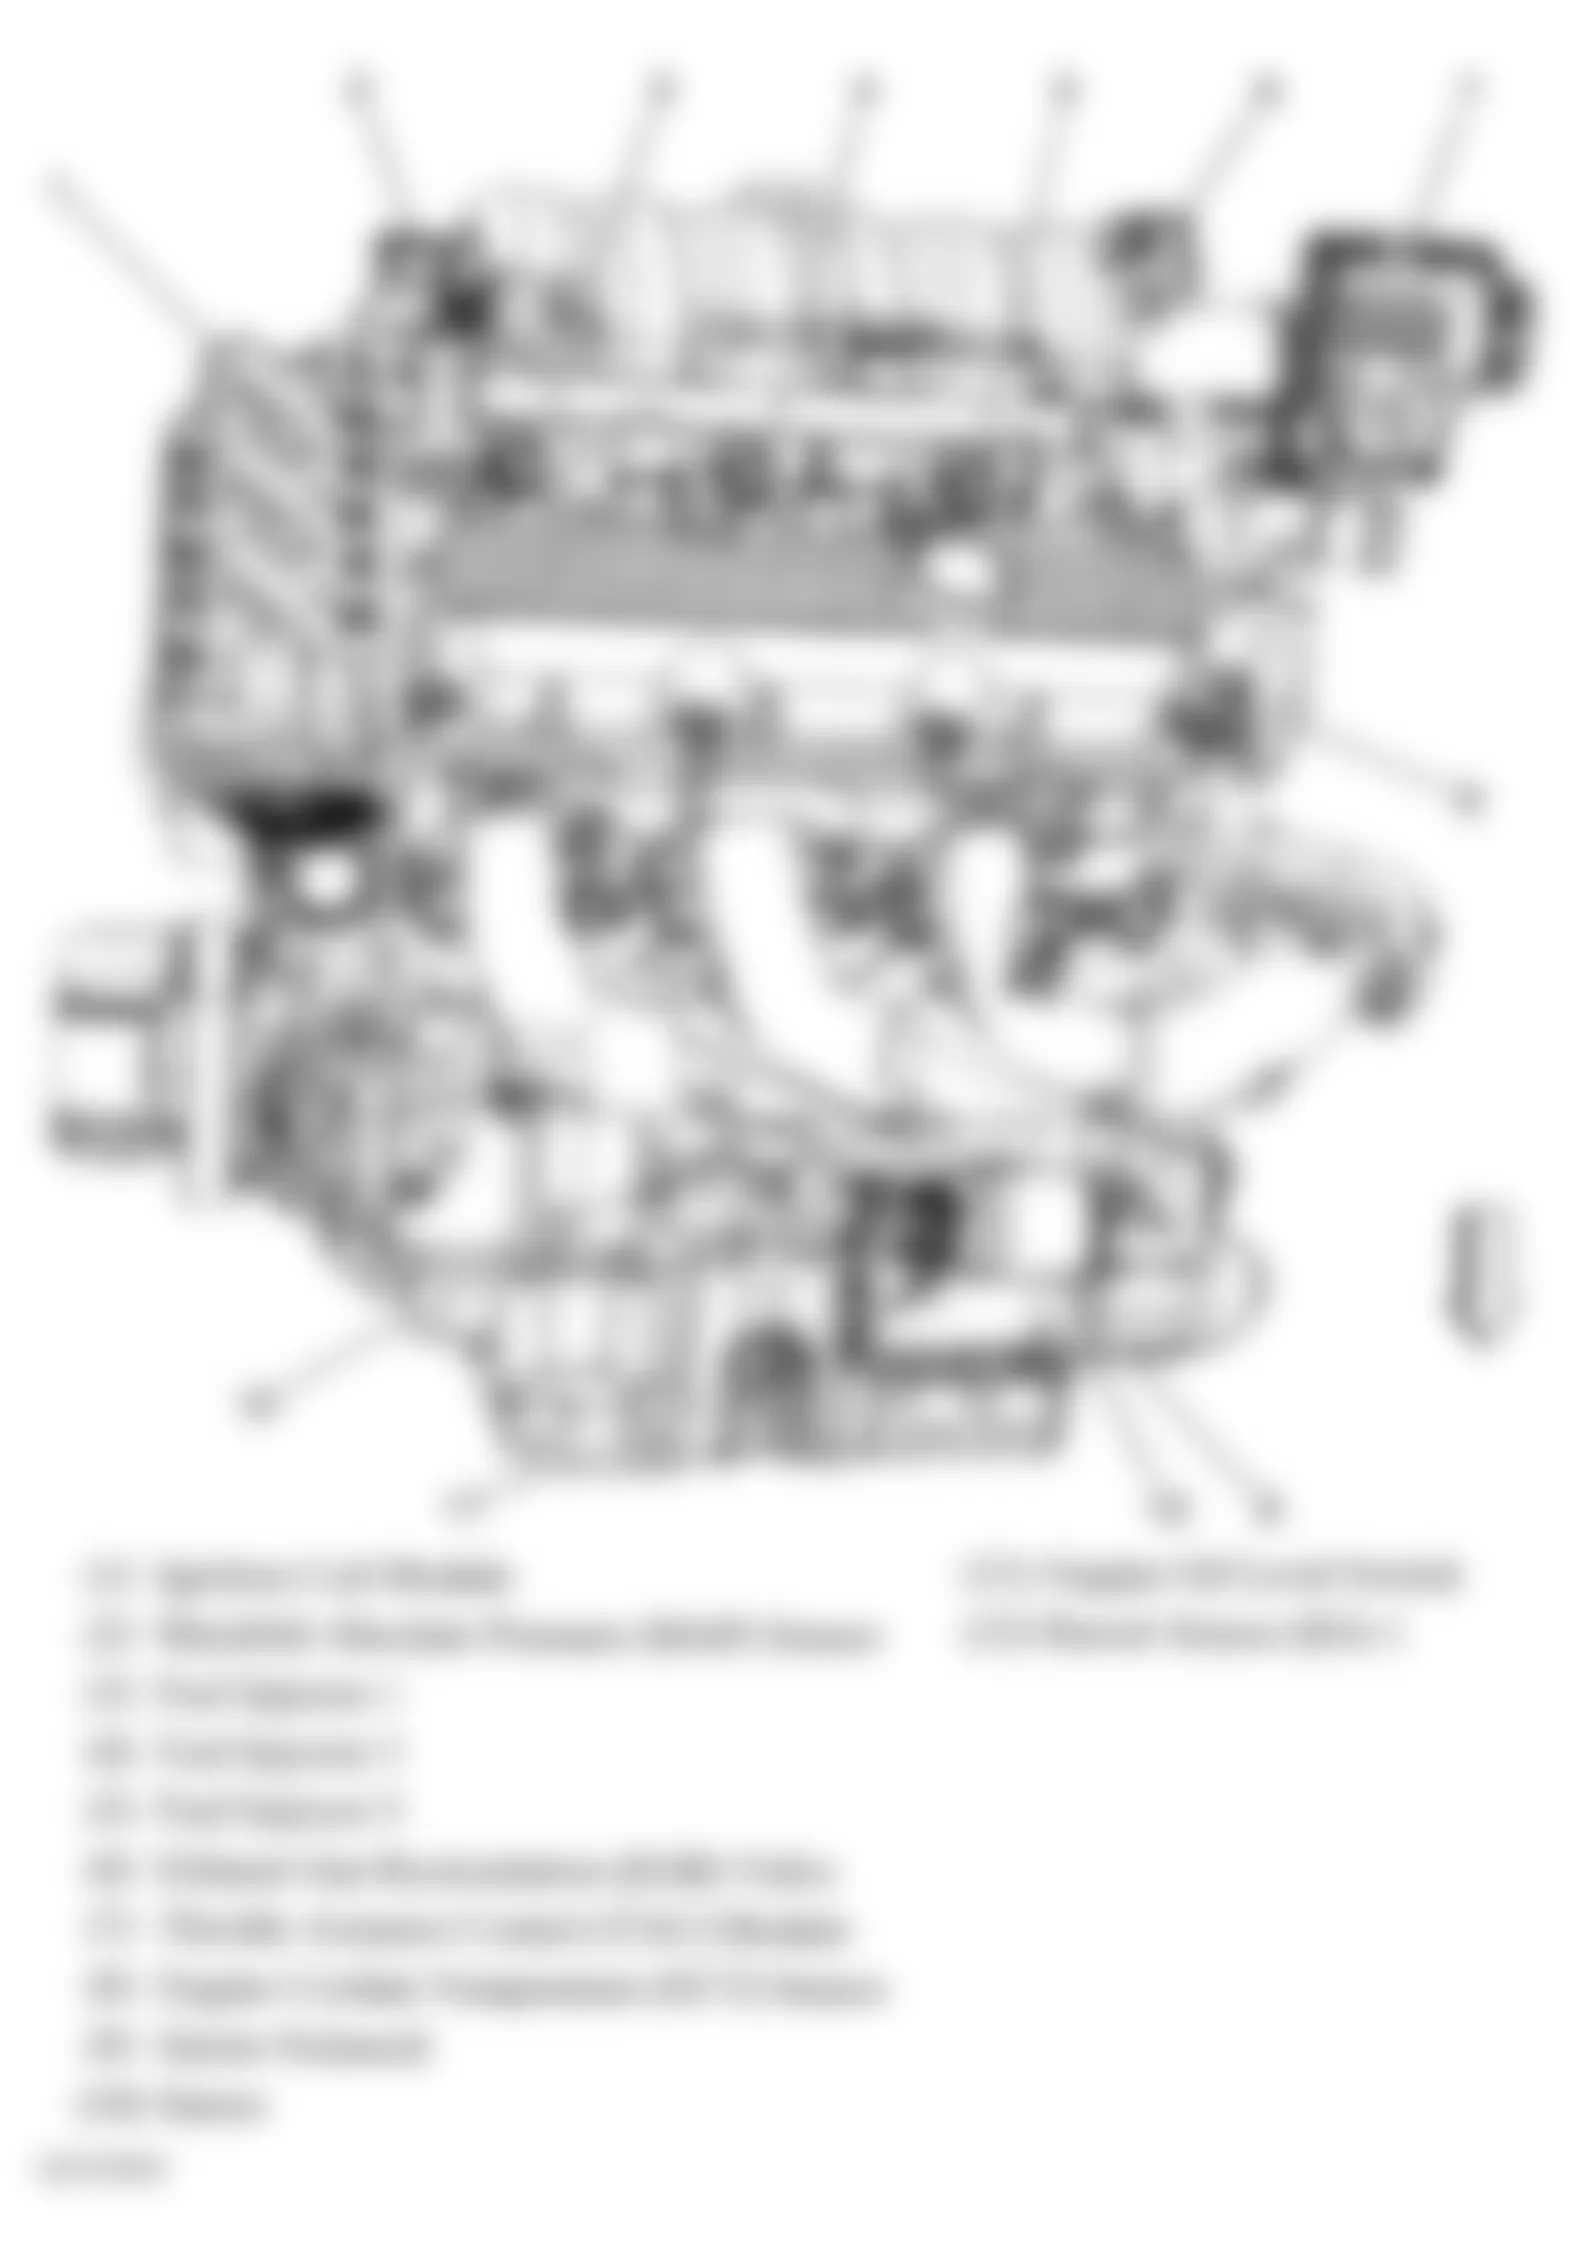 Buick Lucerne CXS 2007 - Component Locations -  Left Side Of Engine (3.8L)